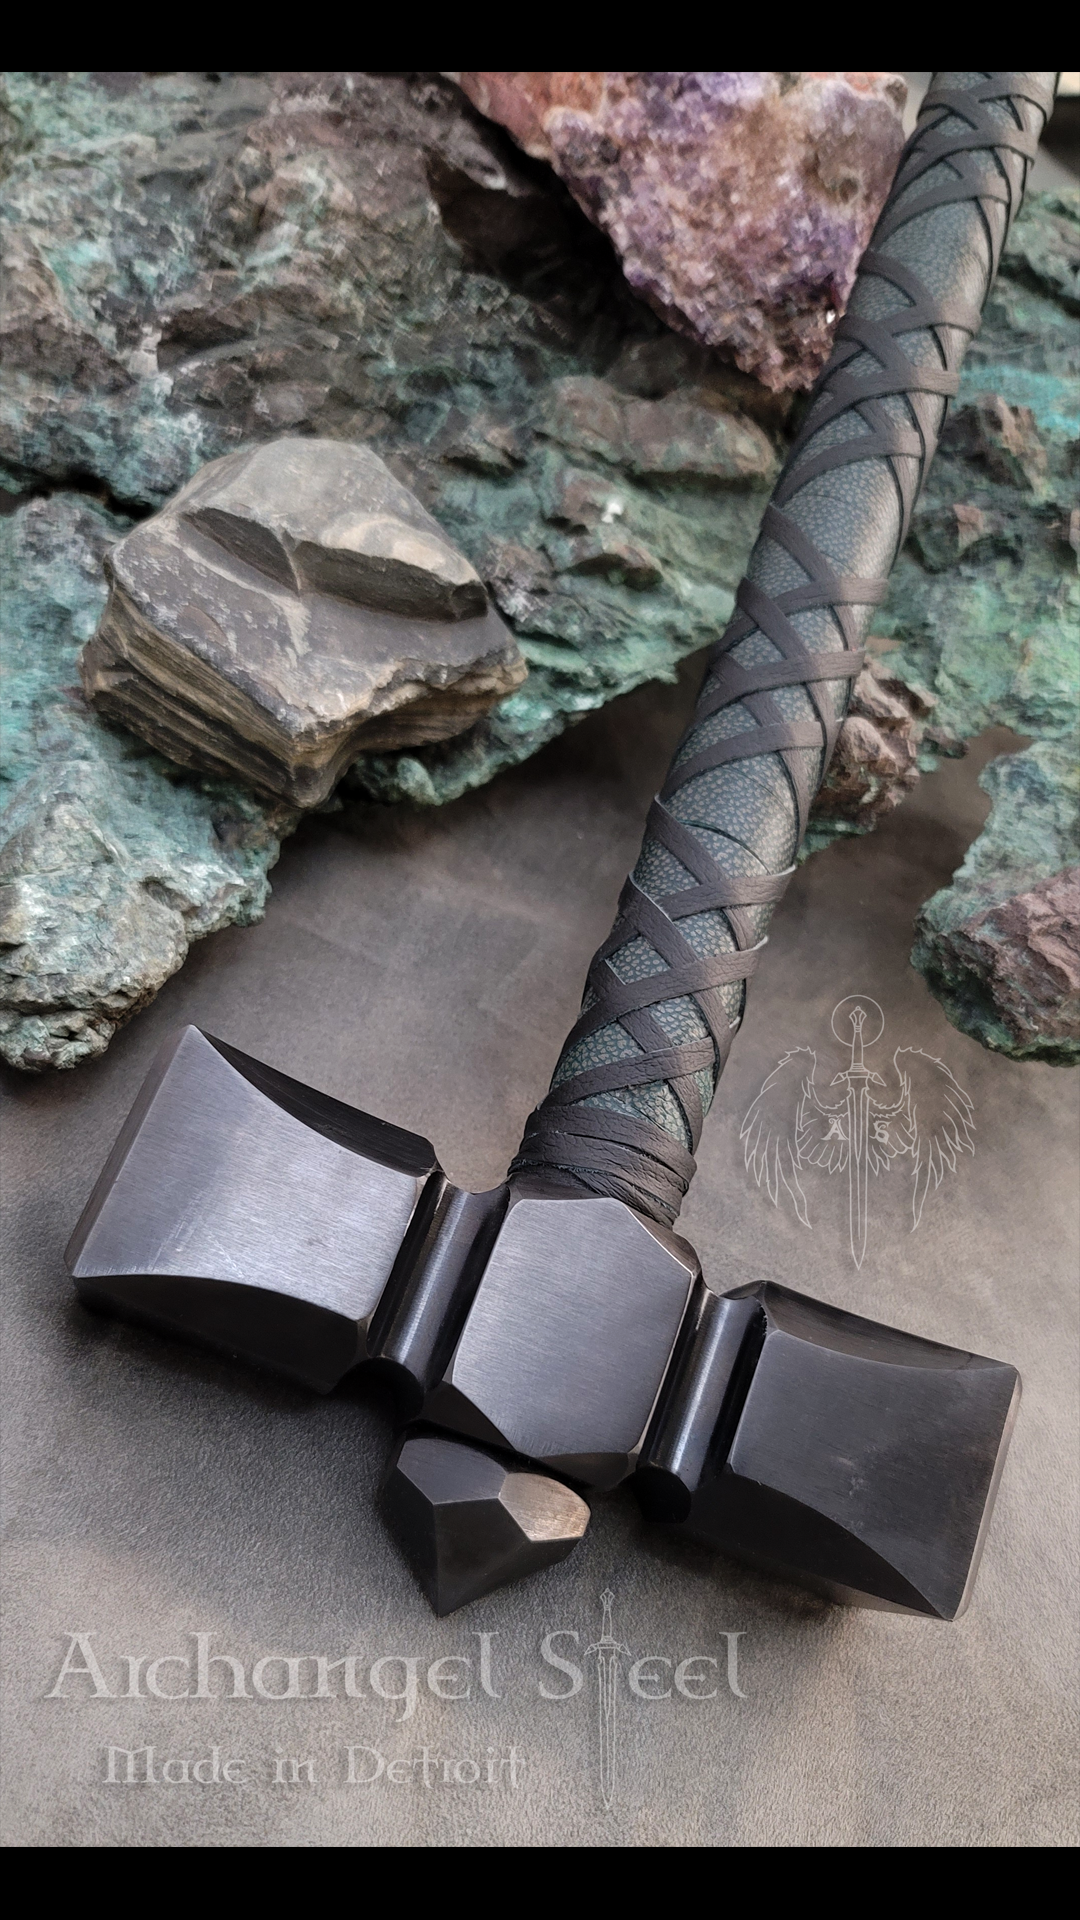 Namba' Green and Black Leather Handle Wrap by ArchangelSteelcrafts